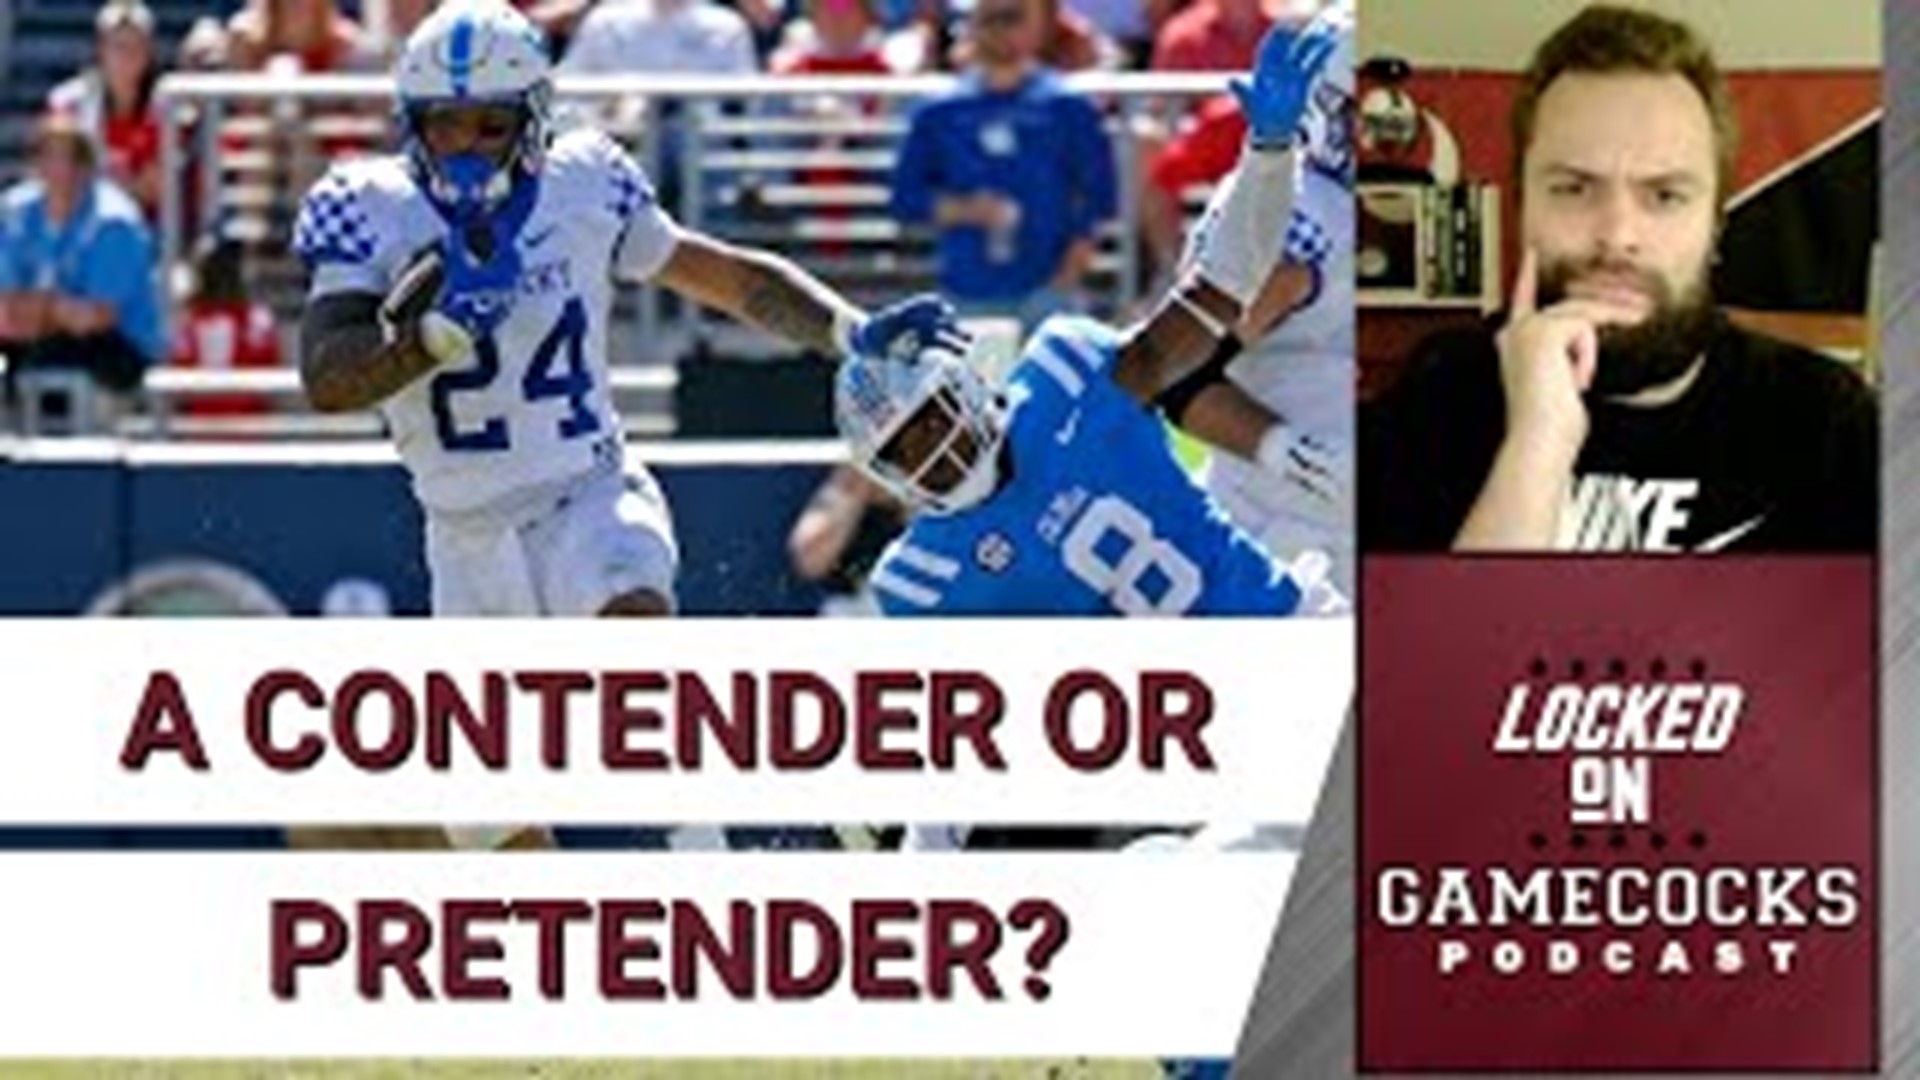 Andrew dives into the personnel and scheme that Kentucky runs on both sides of the ball and how USC could exploit some weak points.